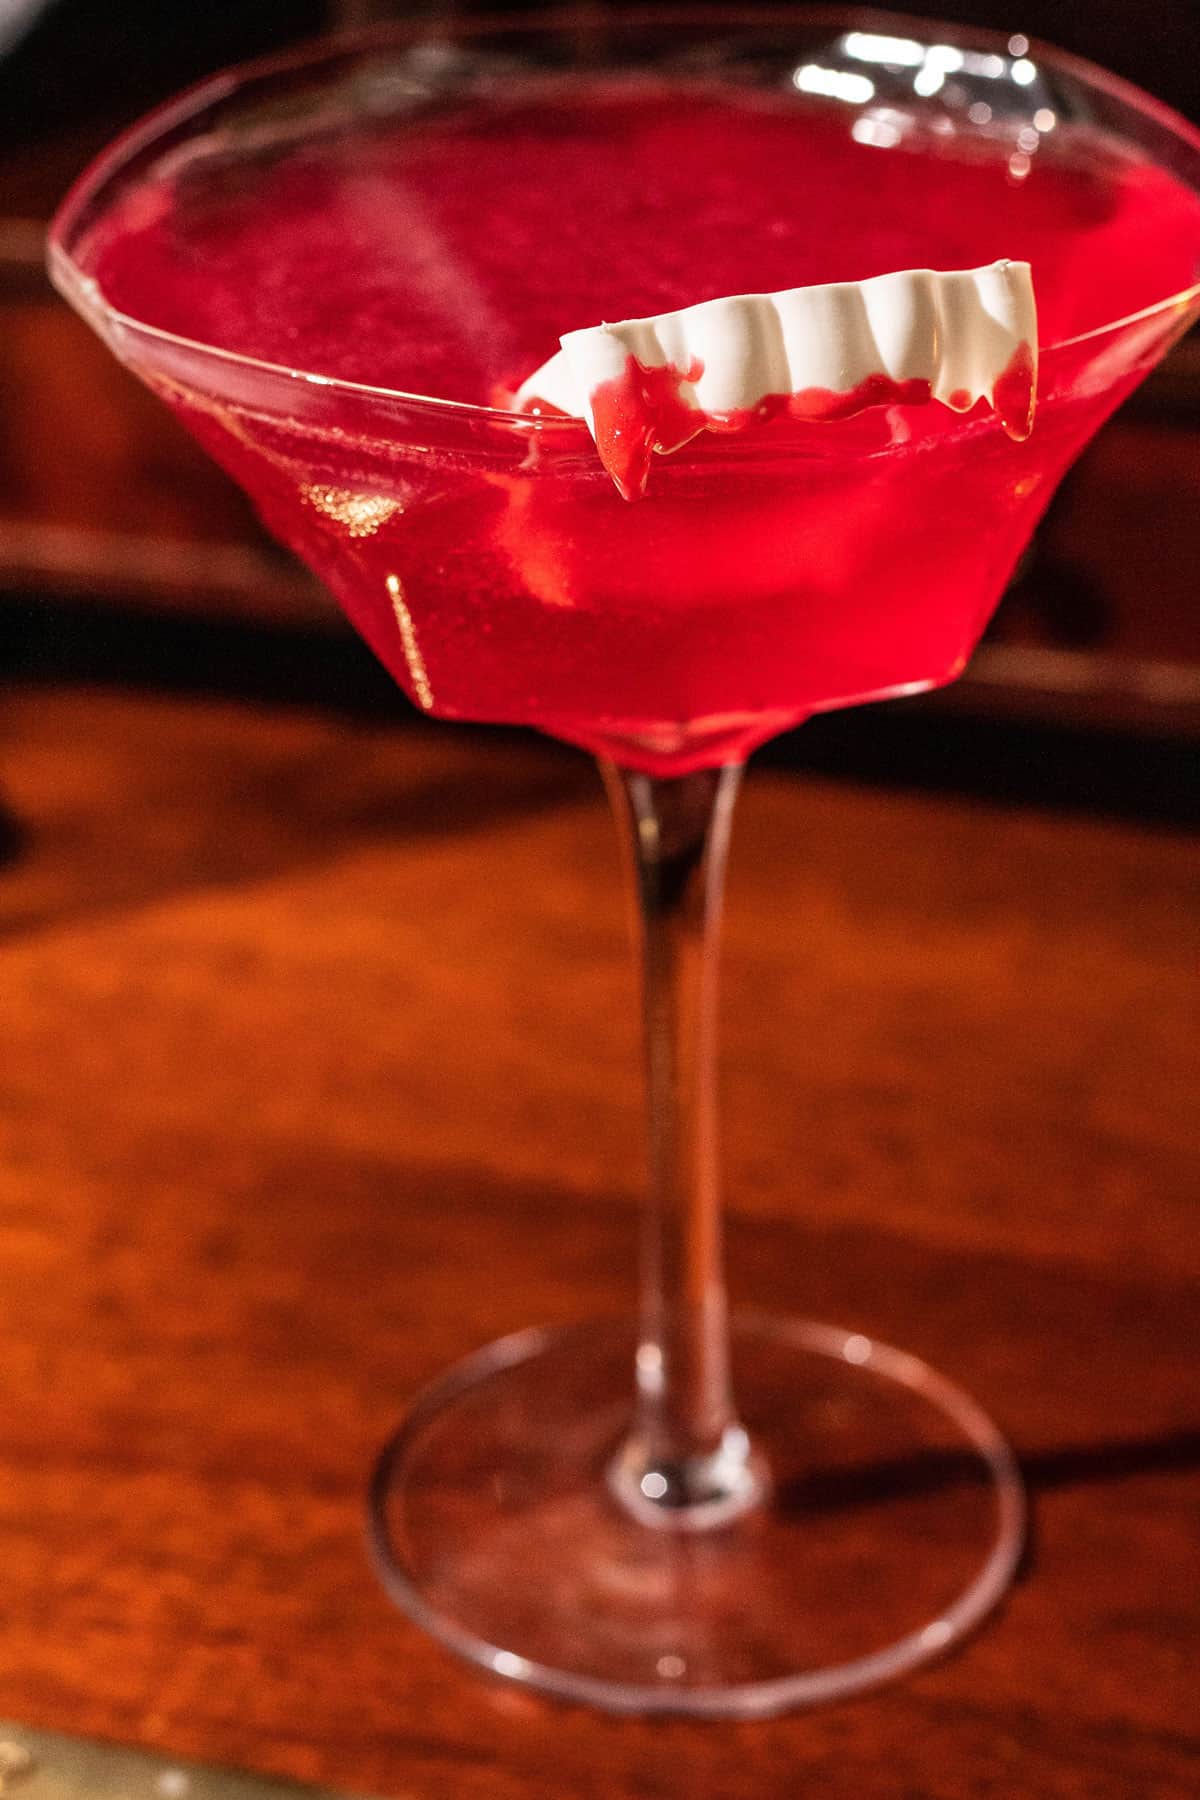 Close up of the vampire's kiss cocktail in a martini glass with a pair of toy vampire fangs with red icing on the teeth. The glass sits on a dark wood background.